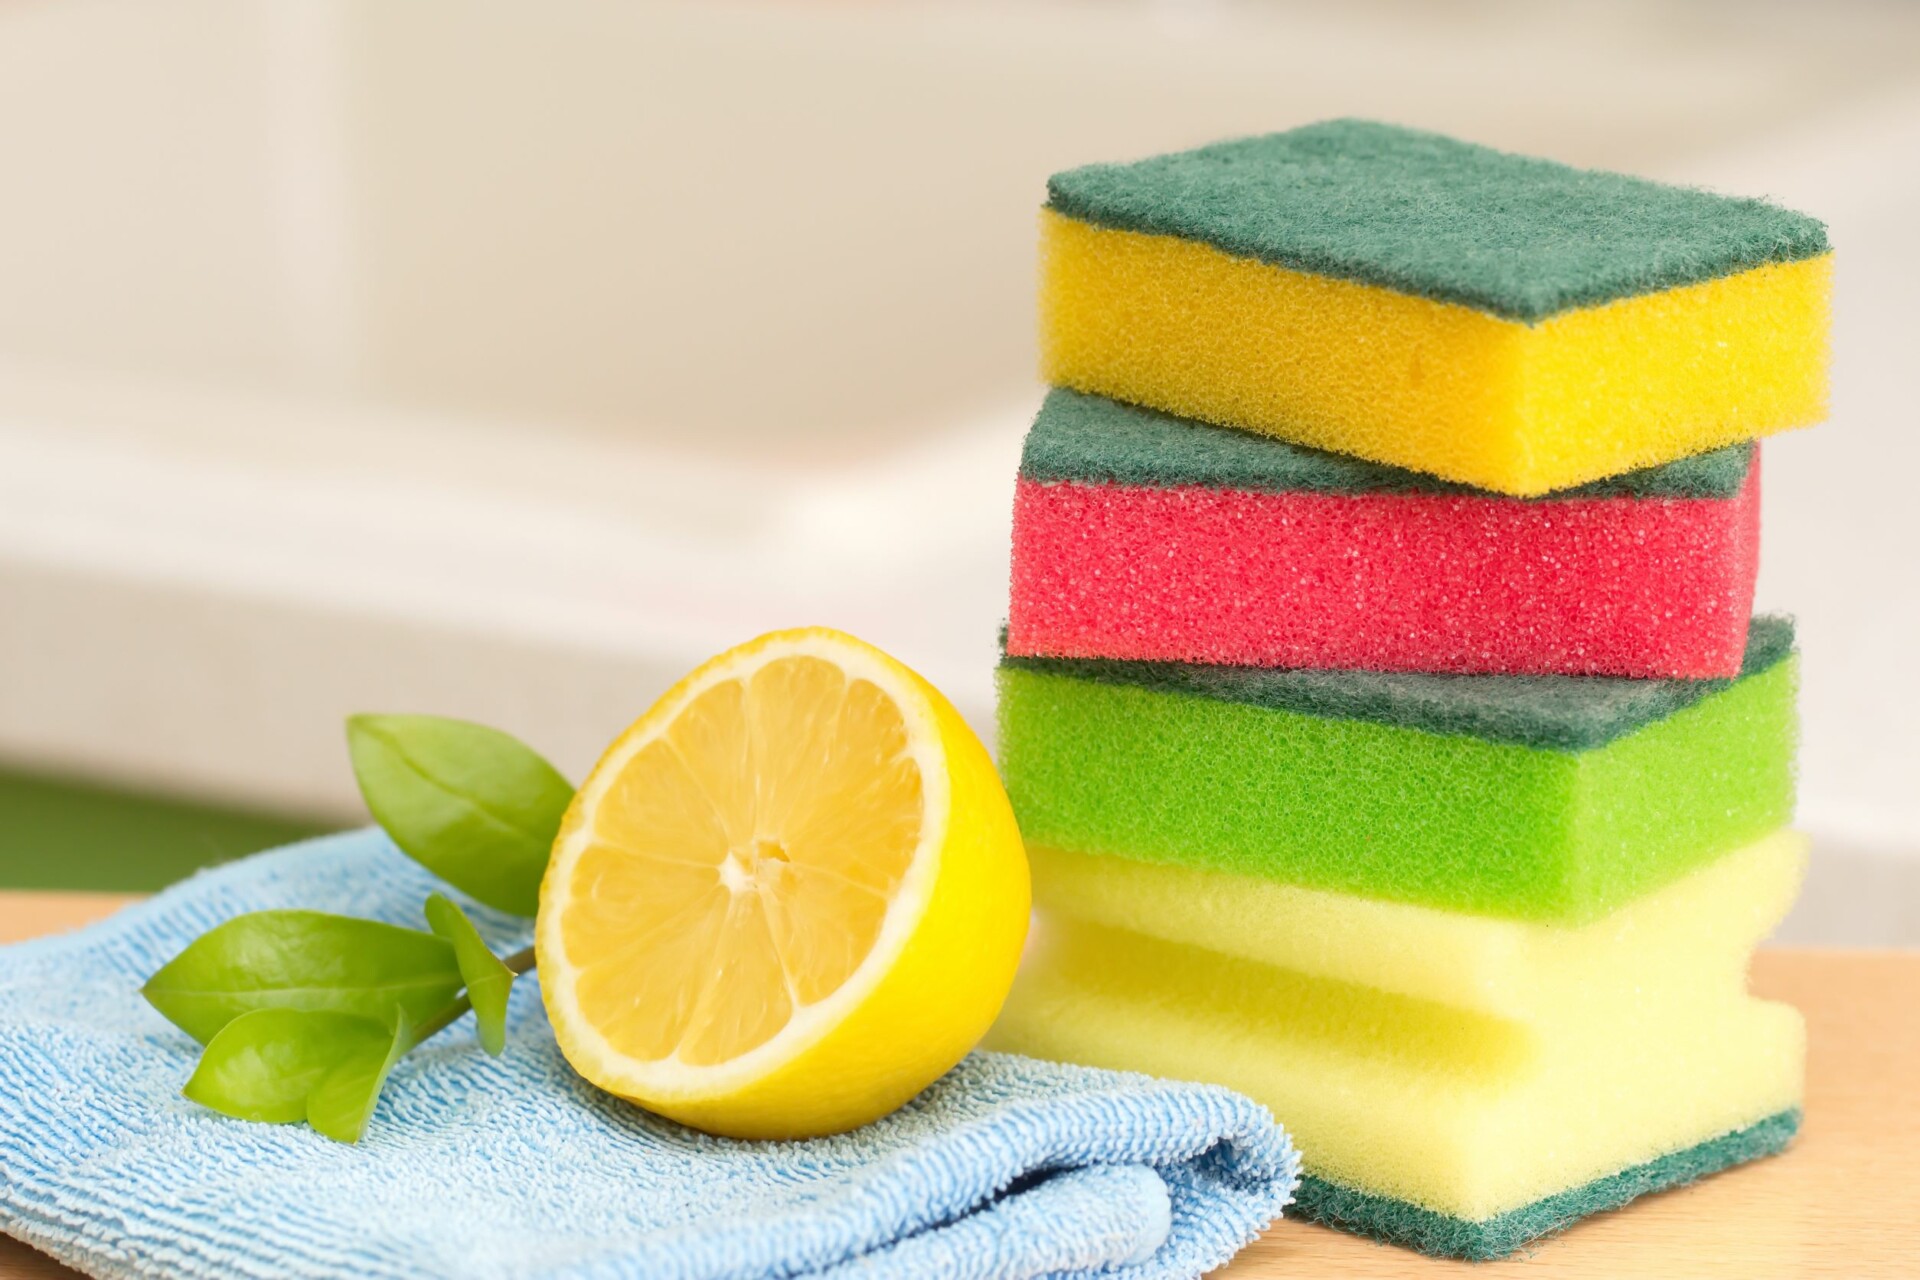 Are Kitchen Sponges Bad for the Environment? 6 Quick Facts